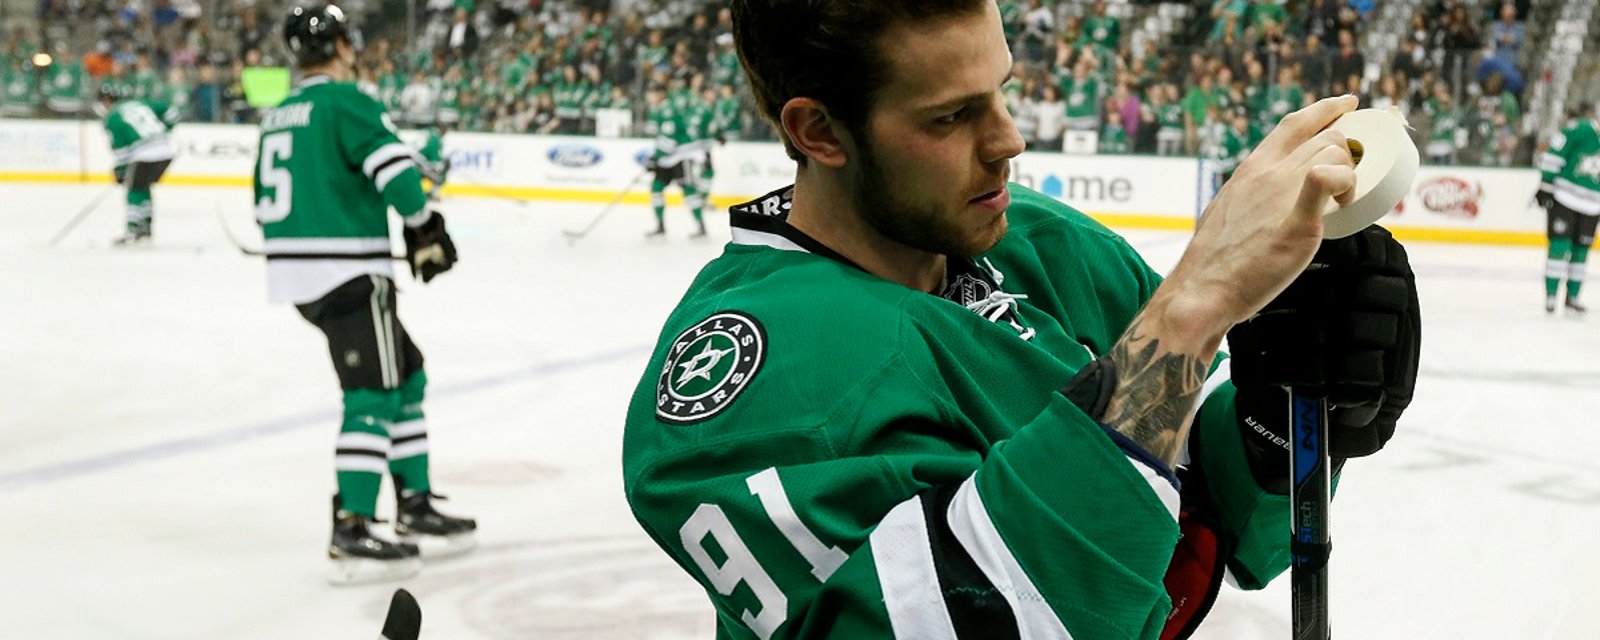 Breaking: Tyler Seguin's injury revealed to be more serious than expected.